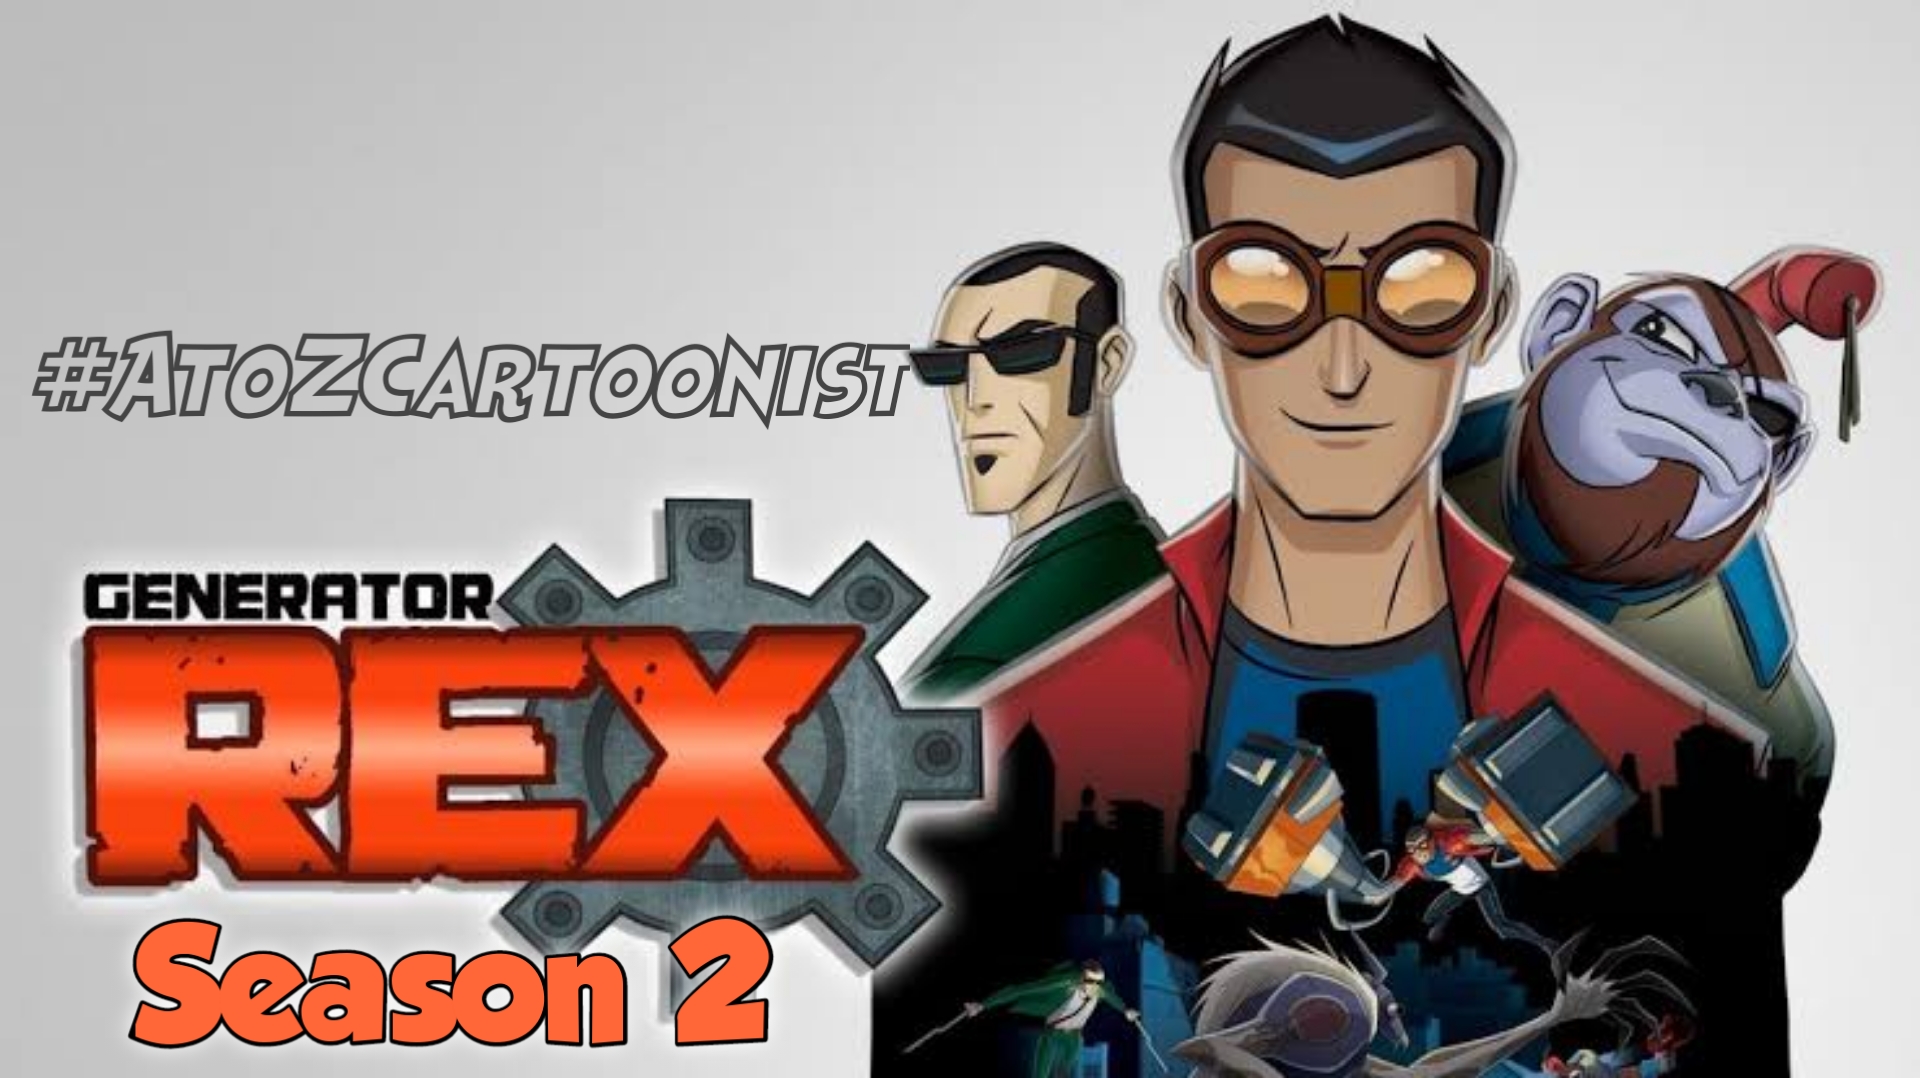 Colleague Pay attention to Chronicle Generator Rex Season 2 [Hindi-Tamil-Telugu-English] Episodes Download  (1080p FHD)